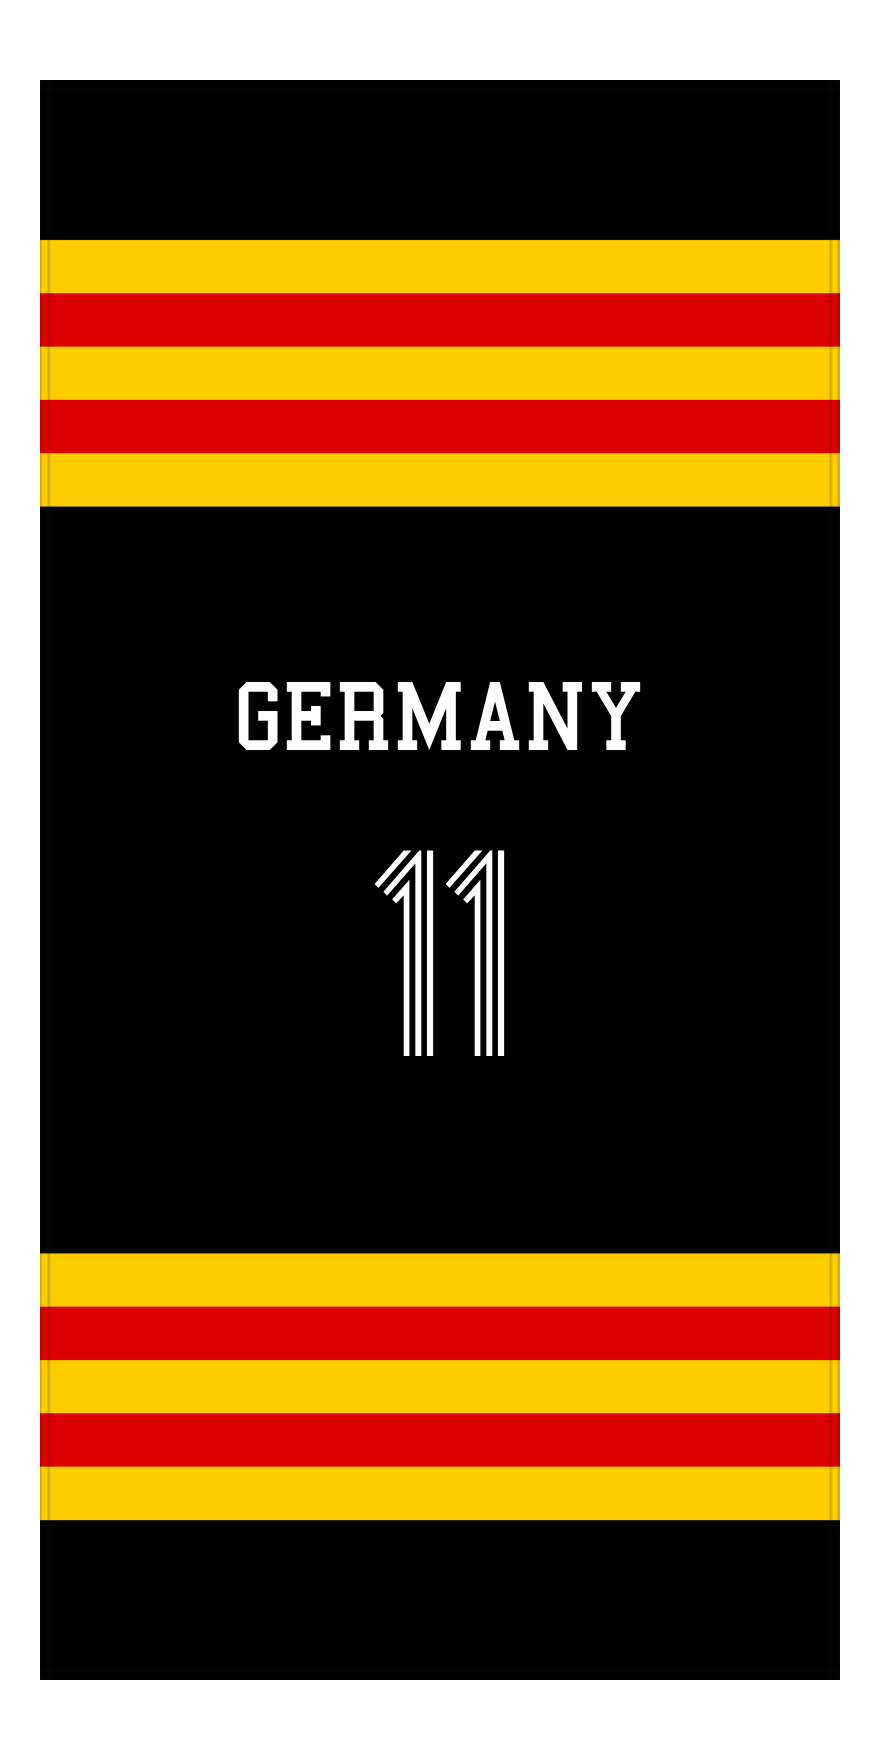 Personalized Jersey Number 2-on-1 Stripes Sports Beach Towel - Germany - Vertical Design - Front View